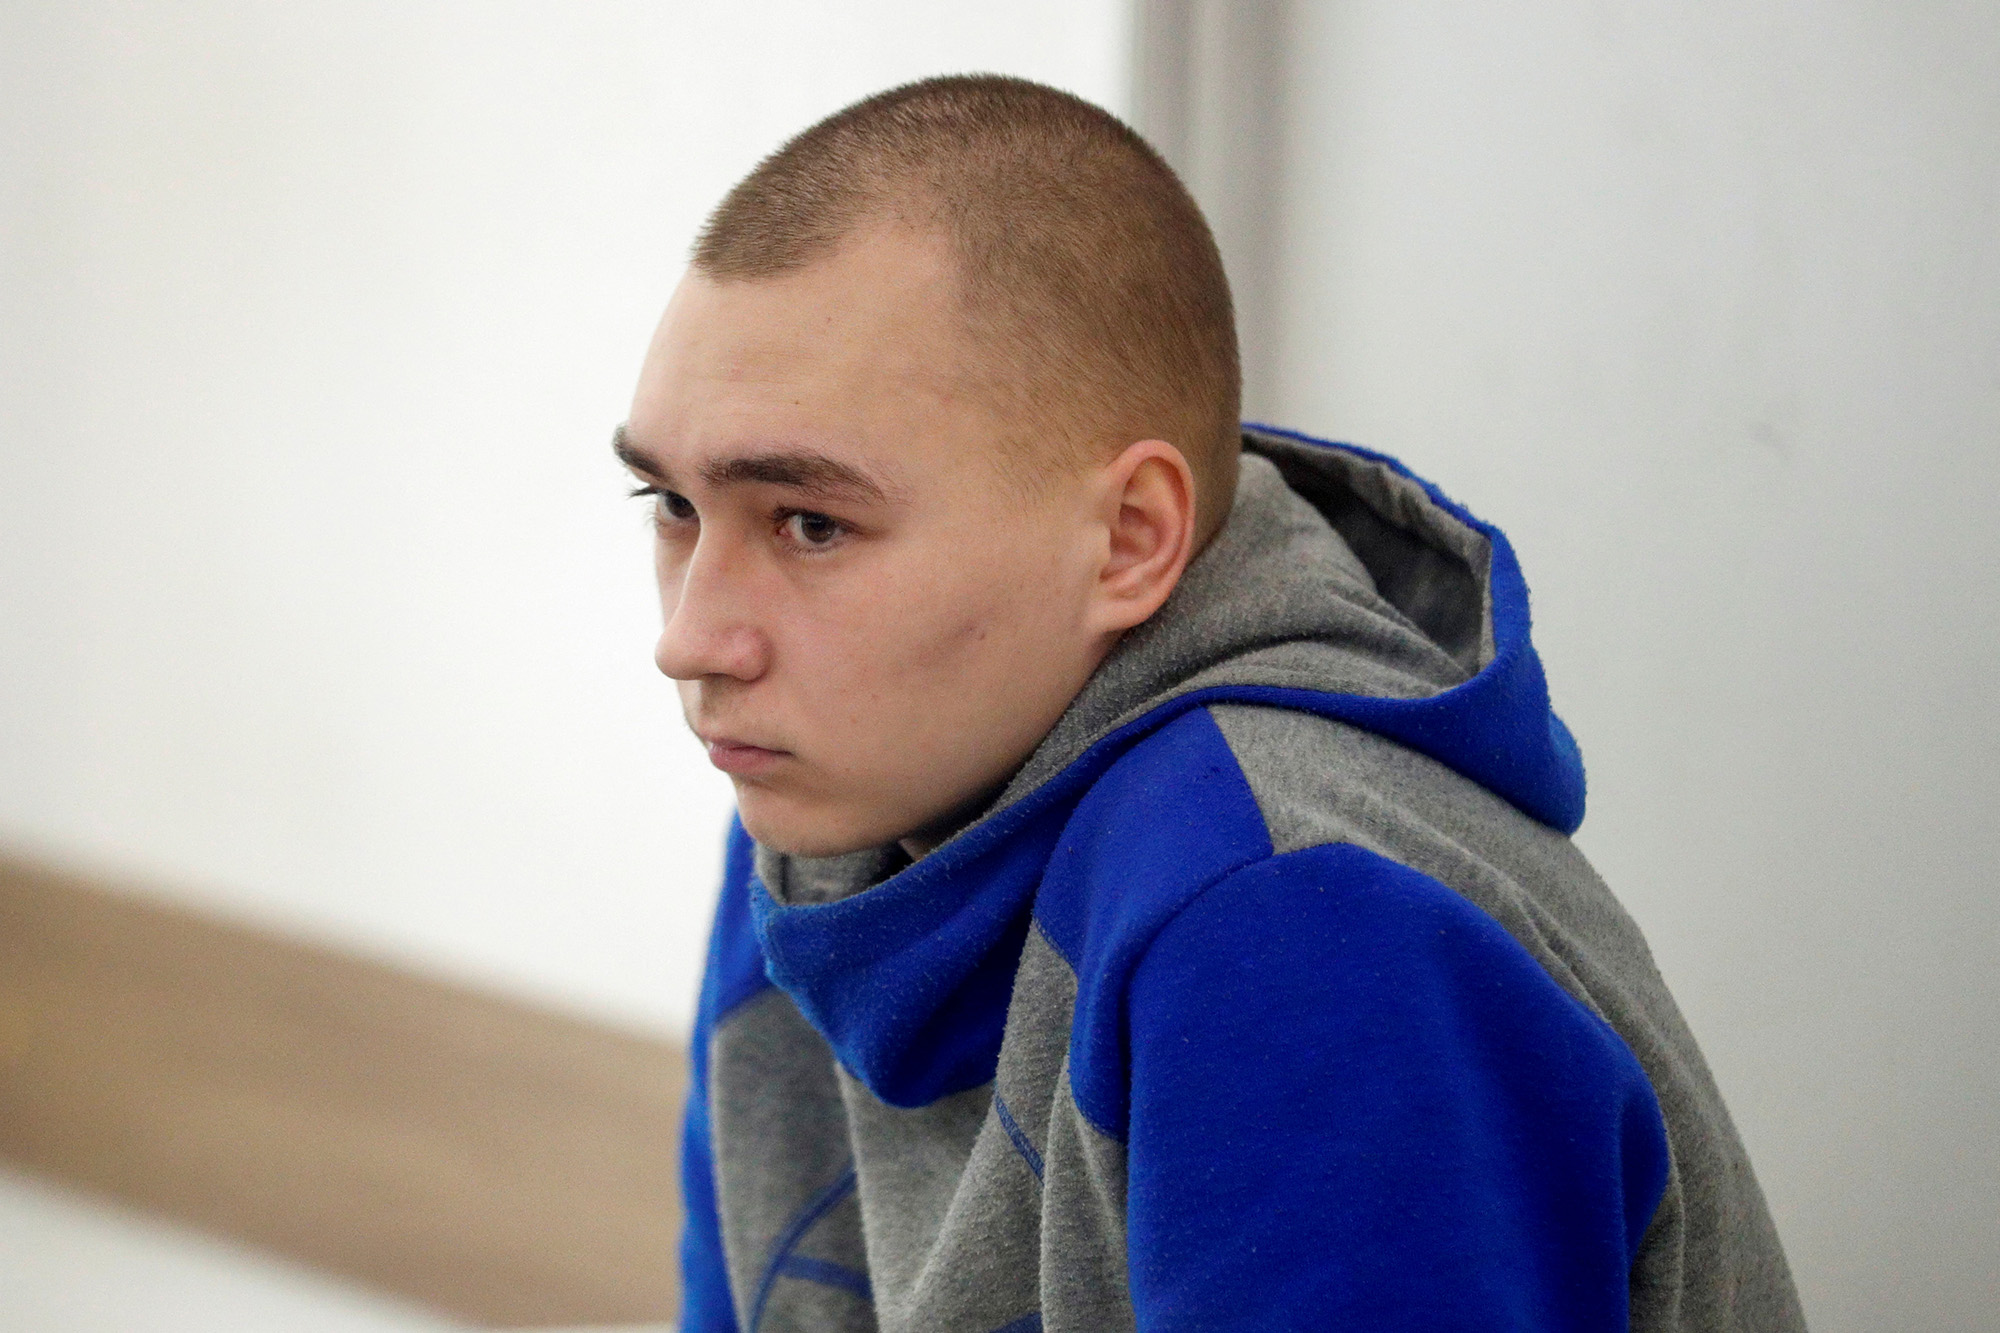 Russian soldier Vadim Shishimarin, 21, attends a court hearing in Kyiv, Ukraine on May 23.